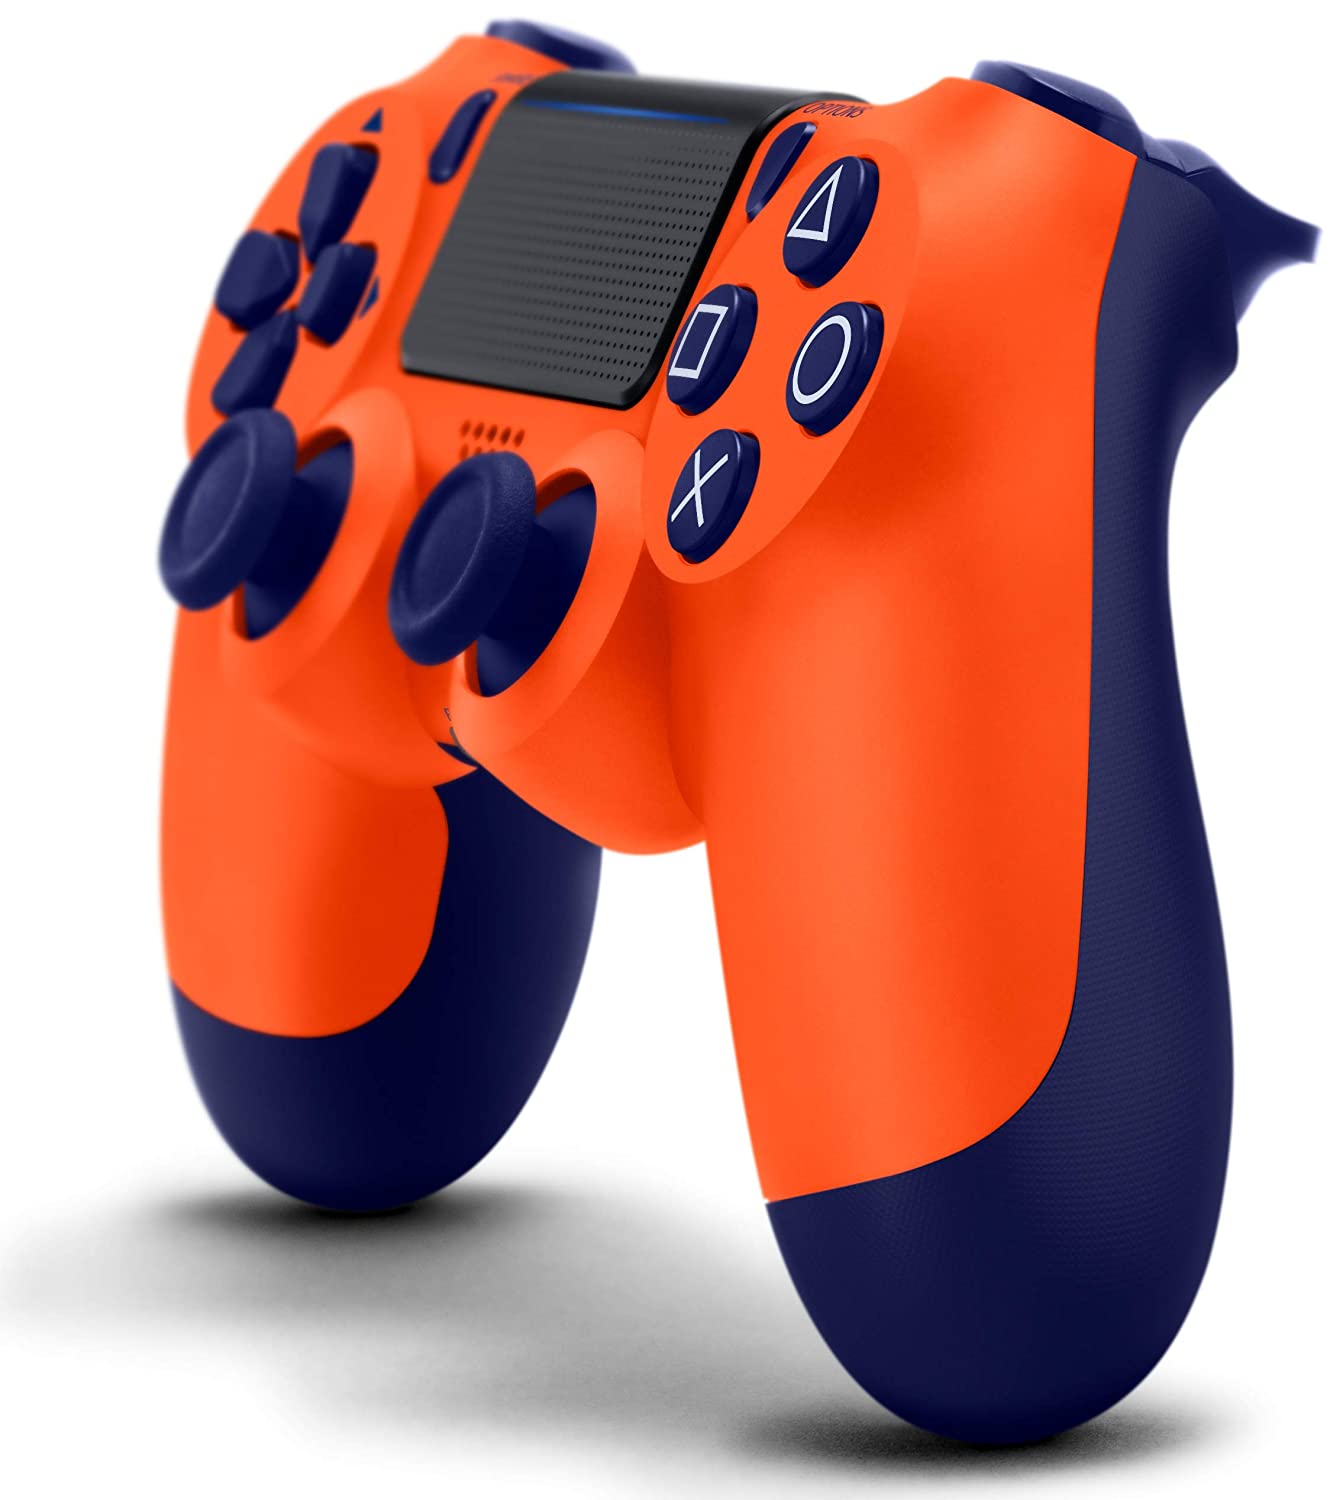 SONY Dualshock 4 Wireless Controller (Sunset Orange) - (PS4) PlayStation 4 Accessories Sony   